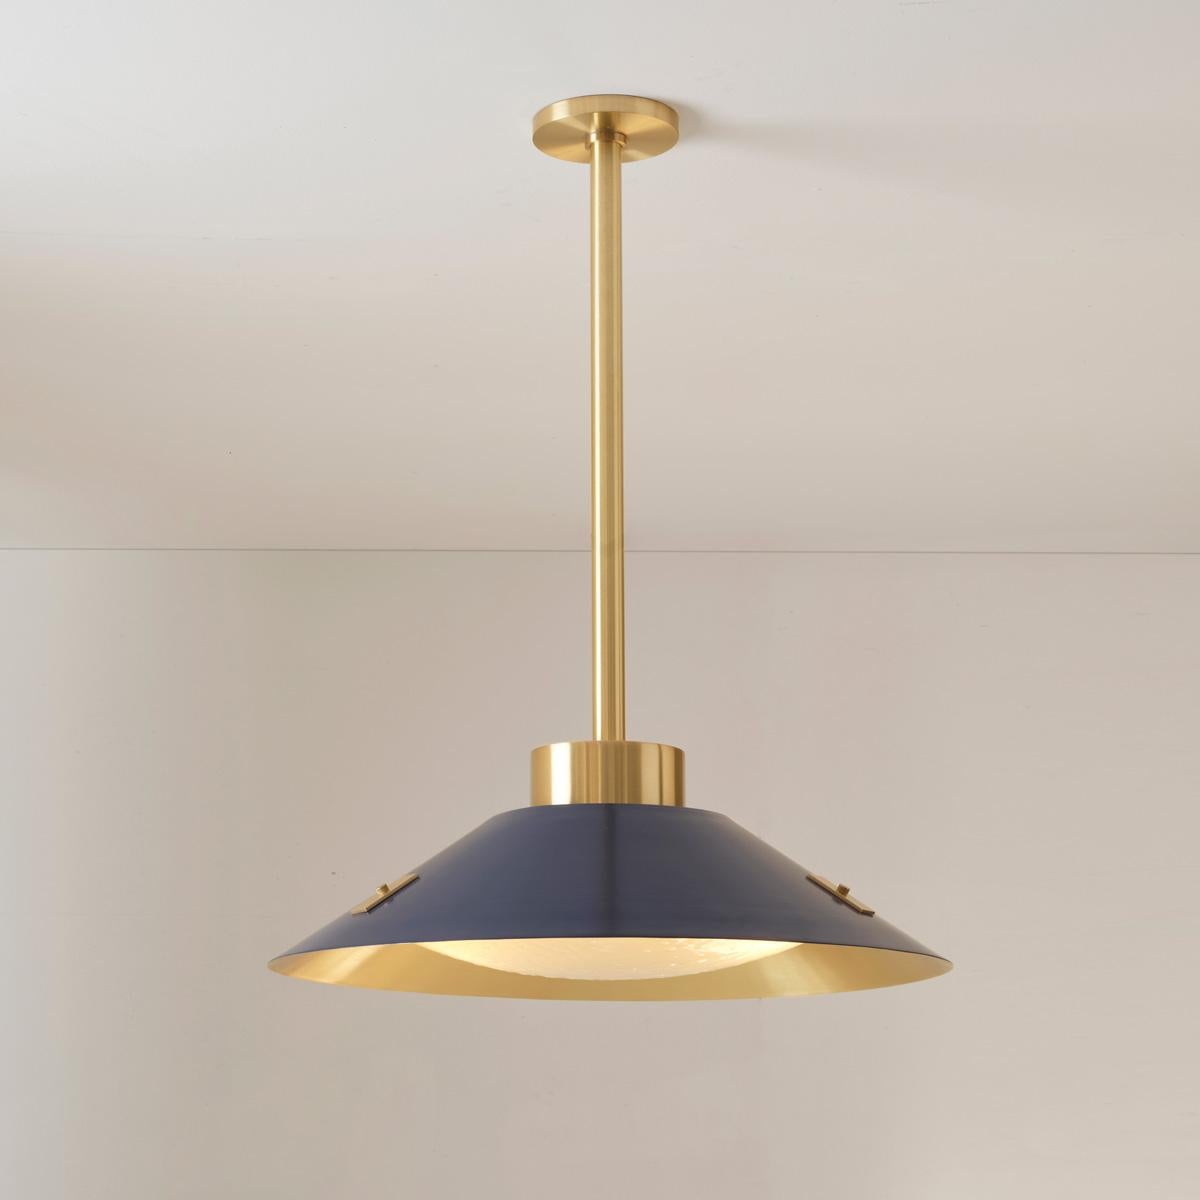 Contemporary Kono Pendant by Gaspare Asaro. Satin Brass and Stone Grey For Sale